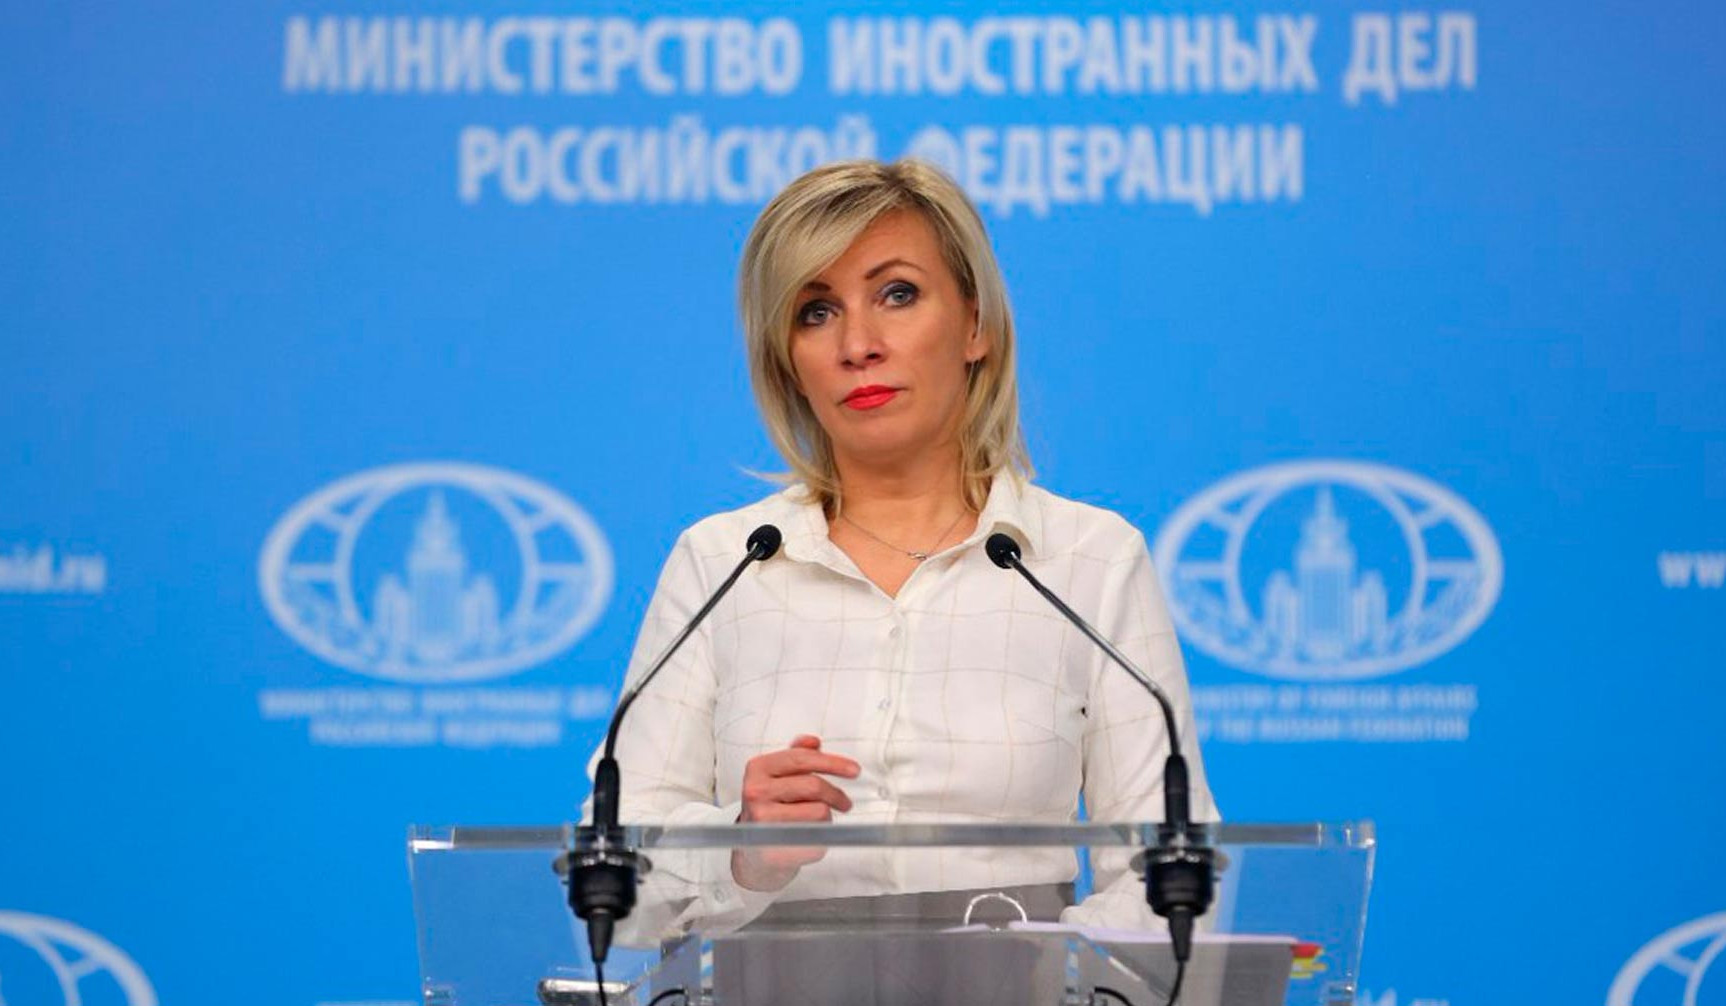 Russia does everything to prevent deepening of situation in region: Zakharova